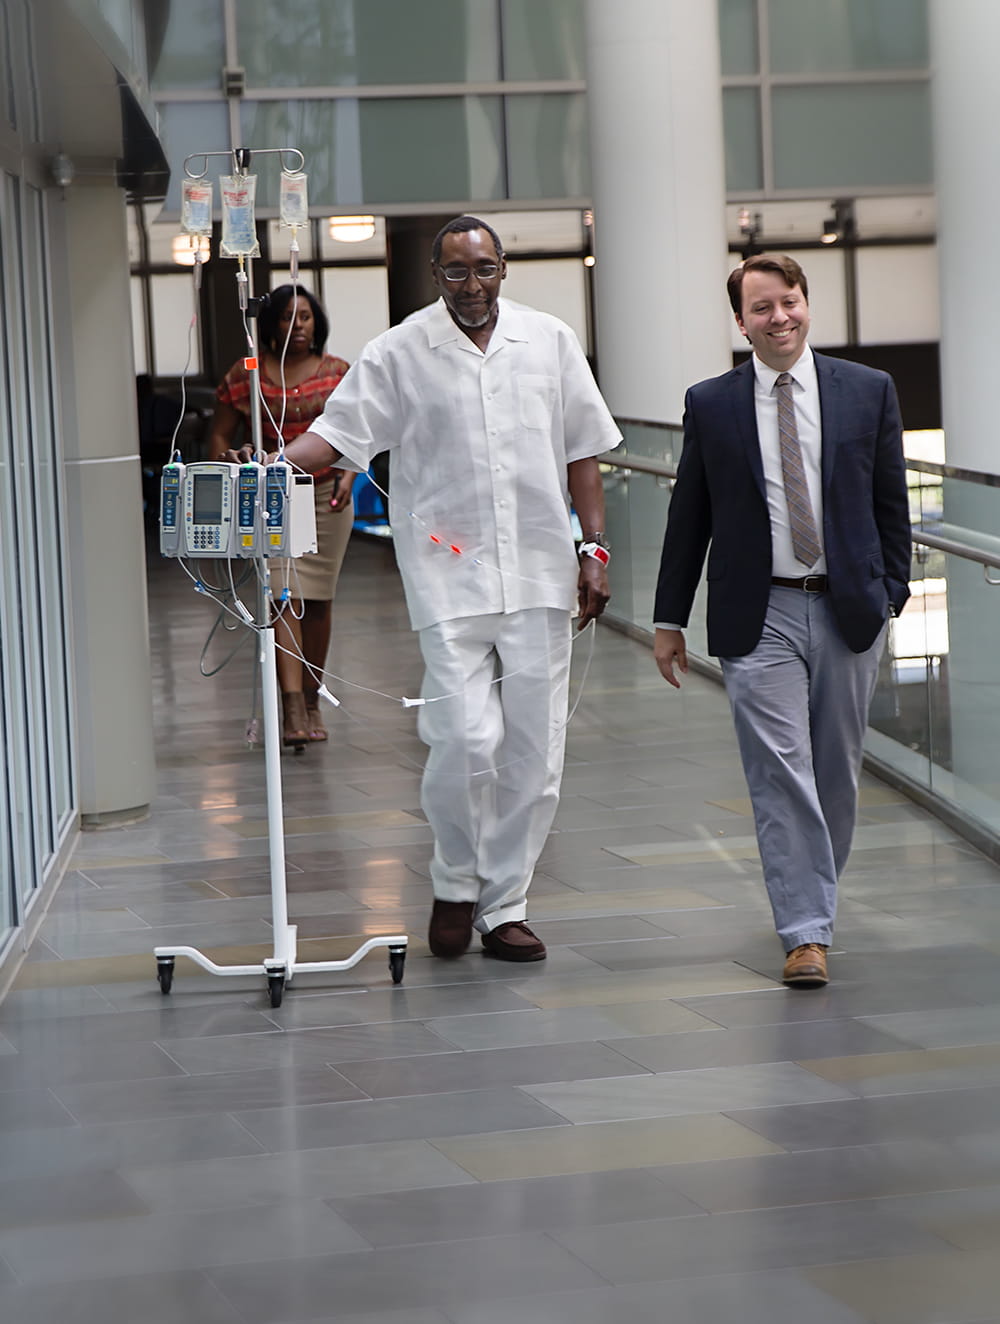 doctor in sports coat walks alongside groom dressed in white shirt and pants but attached to IV pole down the chrome and glass hallway in the Ashley River Tower at MUSC